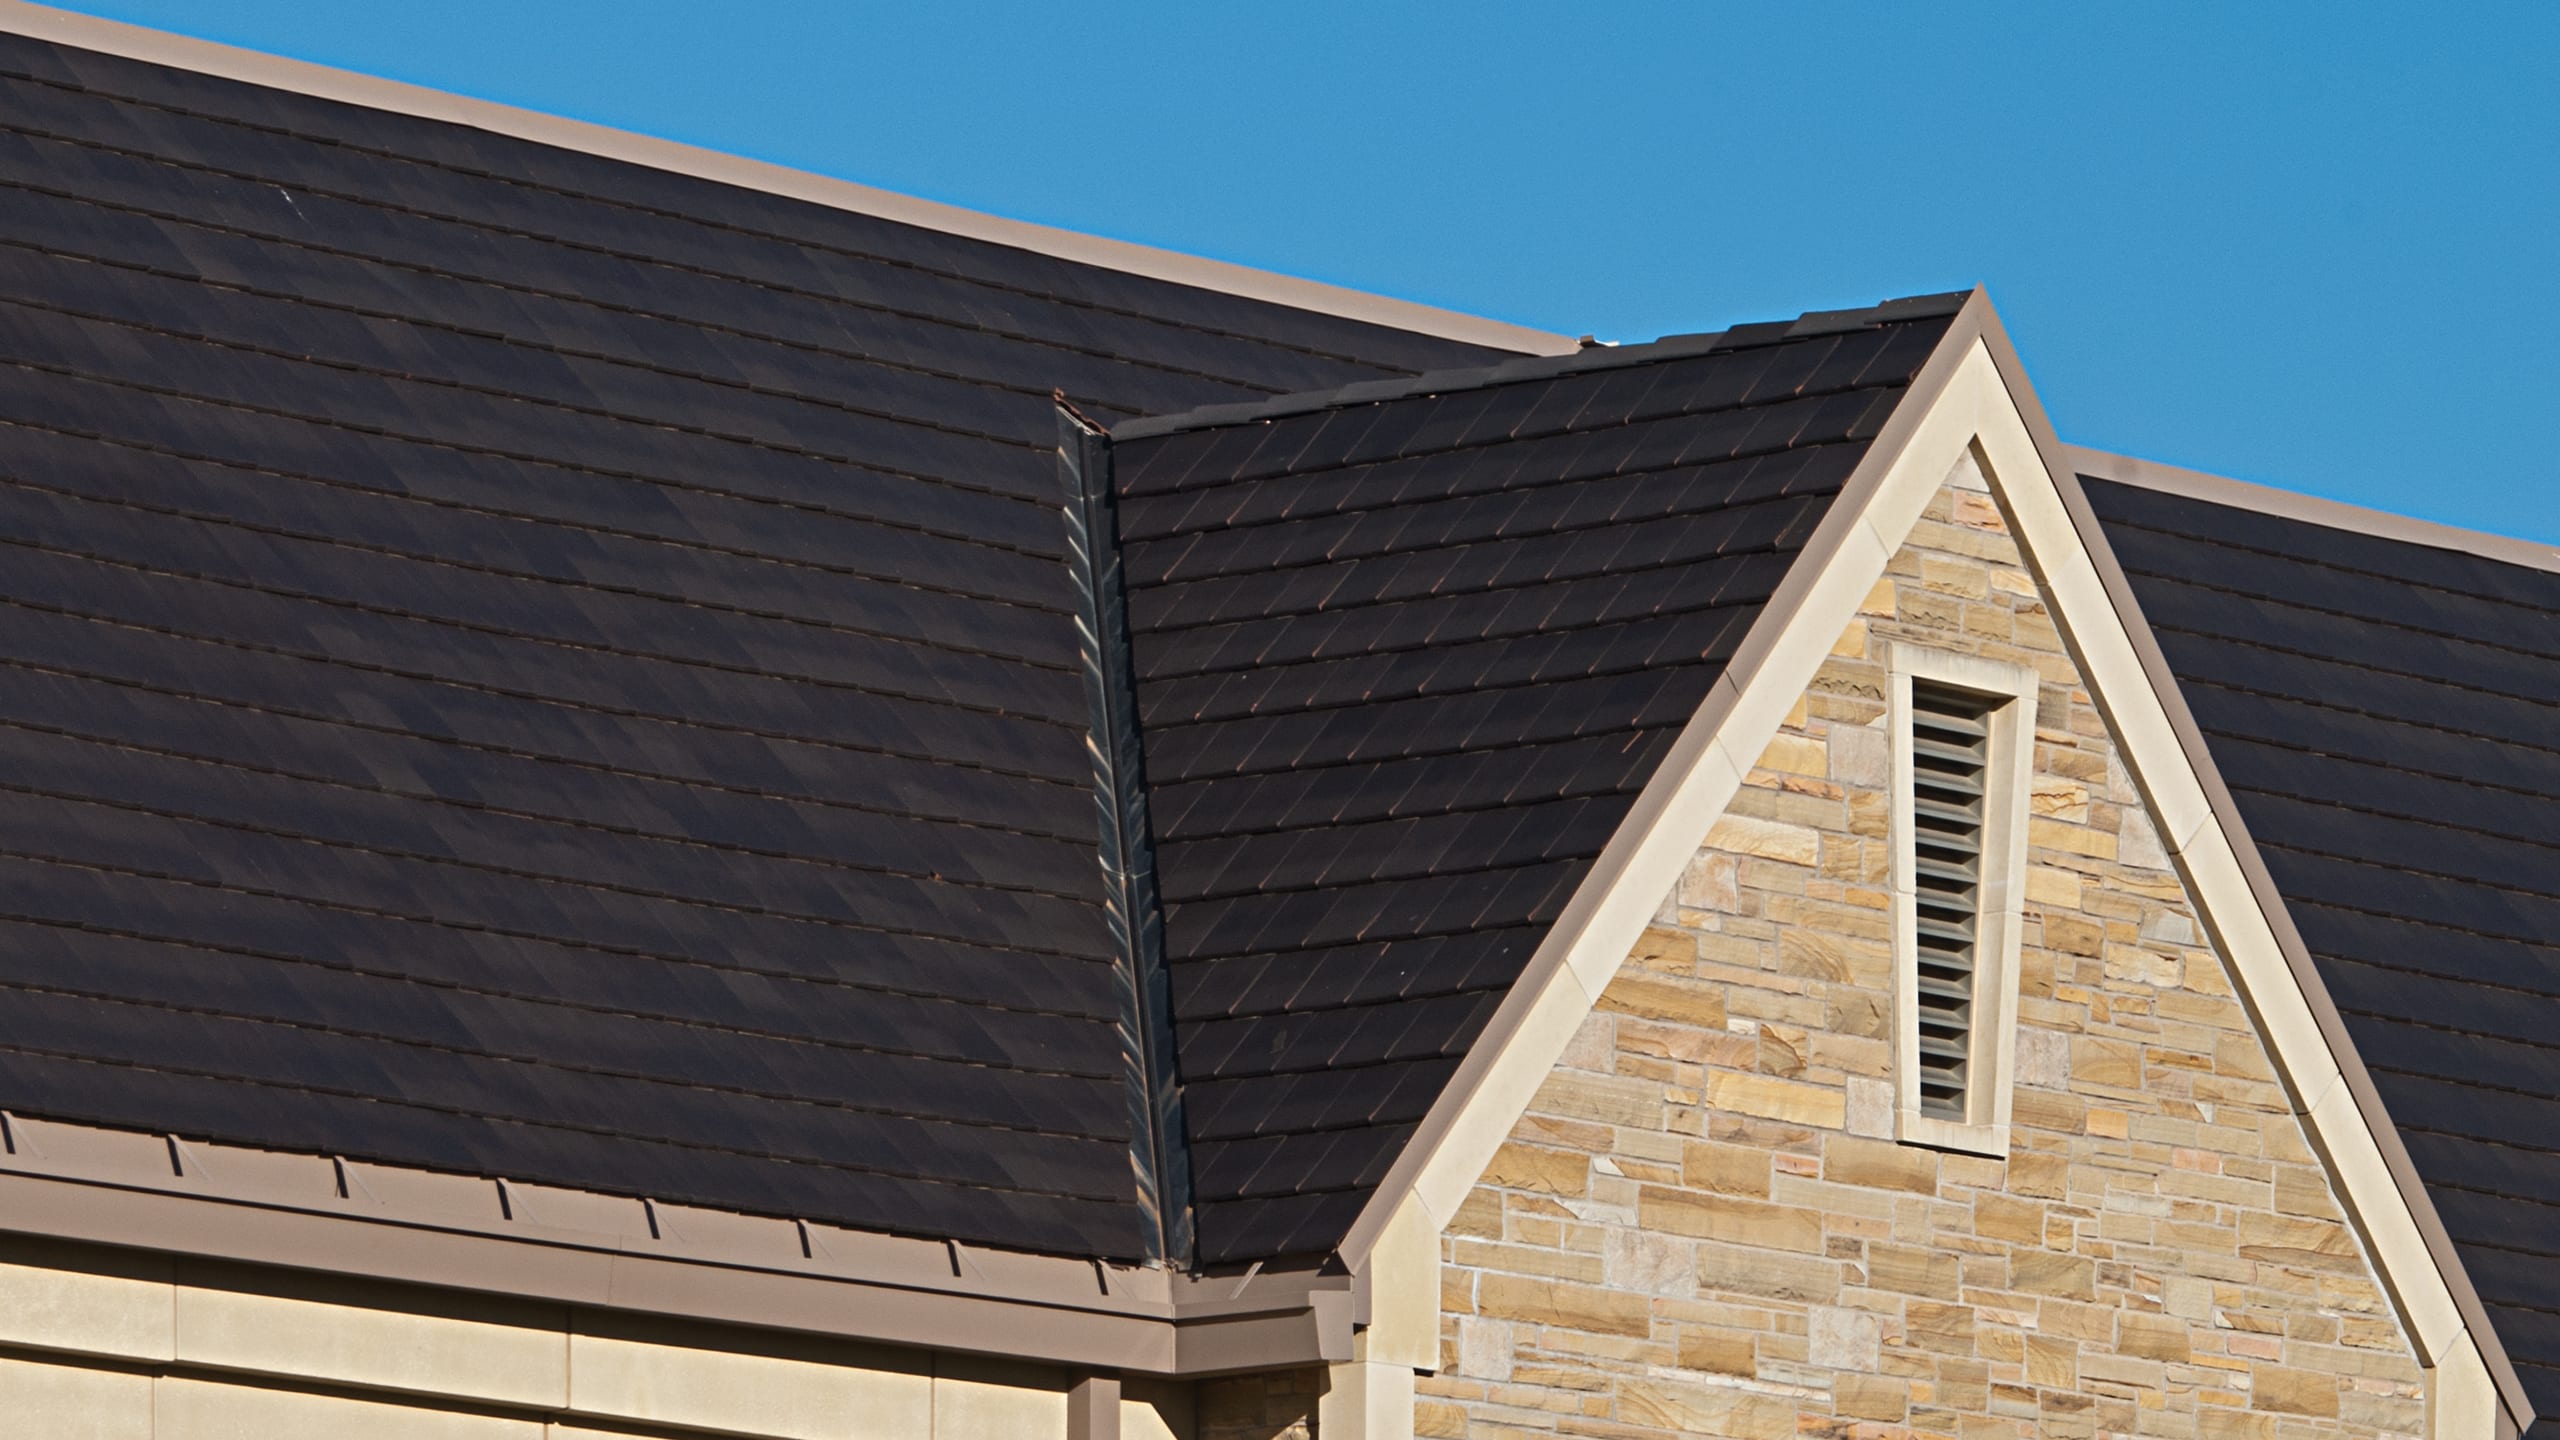 University of Tulsa Featuring Ludowici LudoSlate Clay Roof Tile